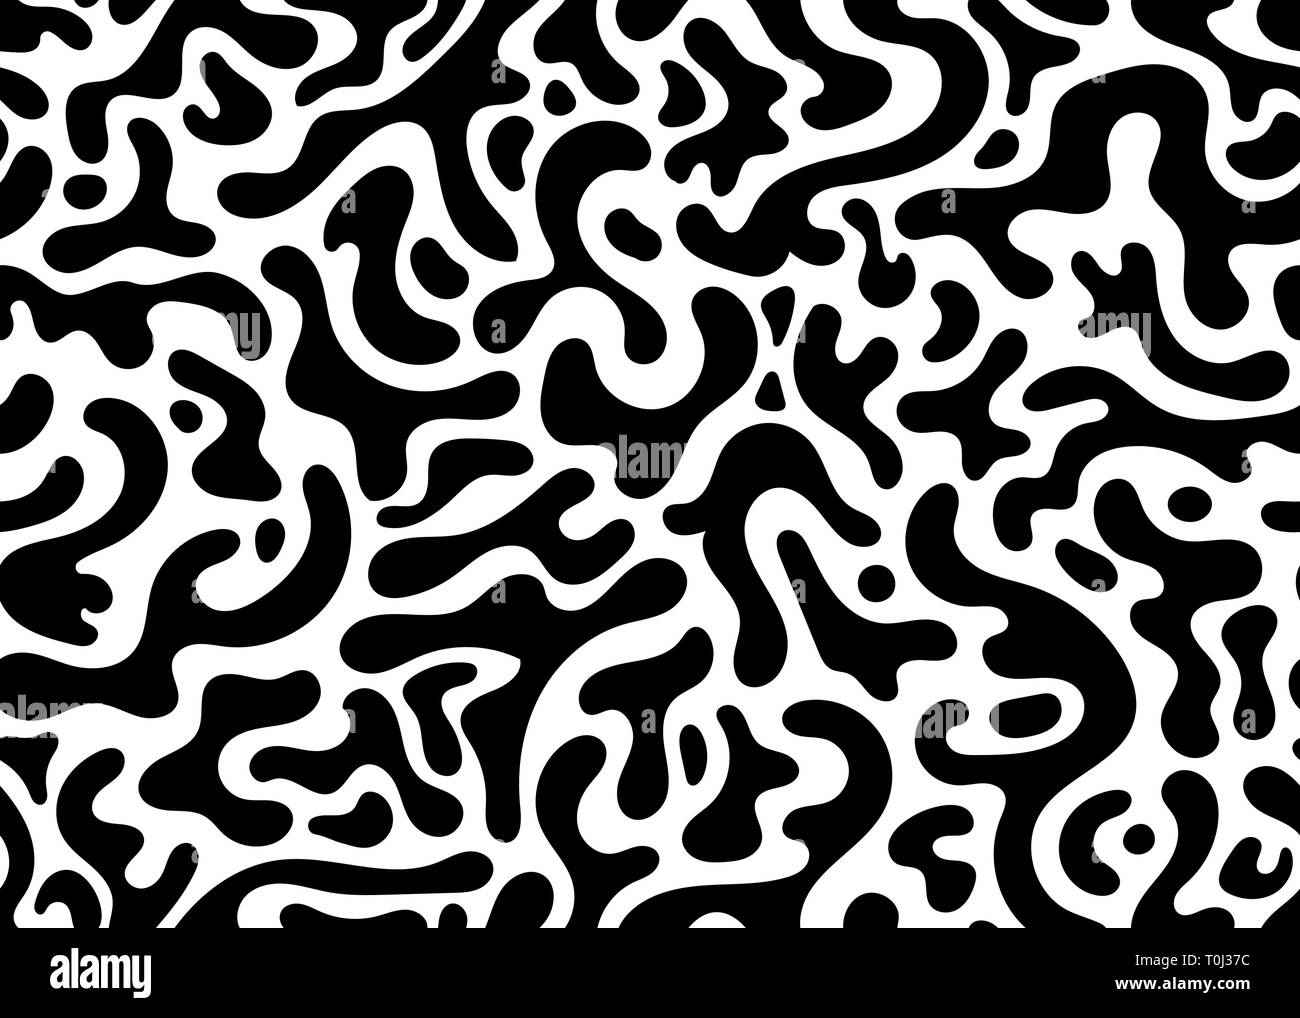 Black and white modern camouflage seamless pattern. vector background illustration for web, fashion, surface design Stock Vector